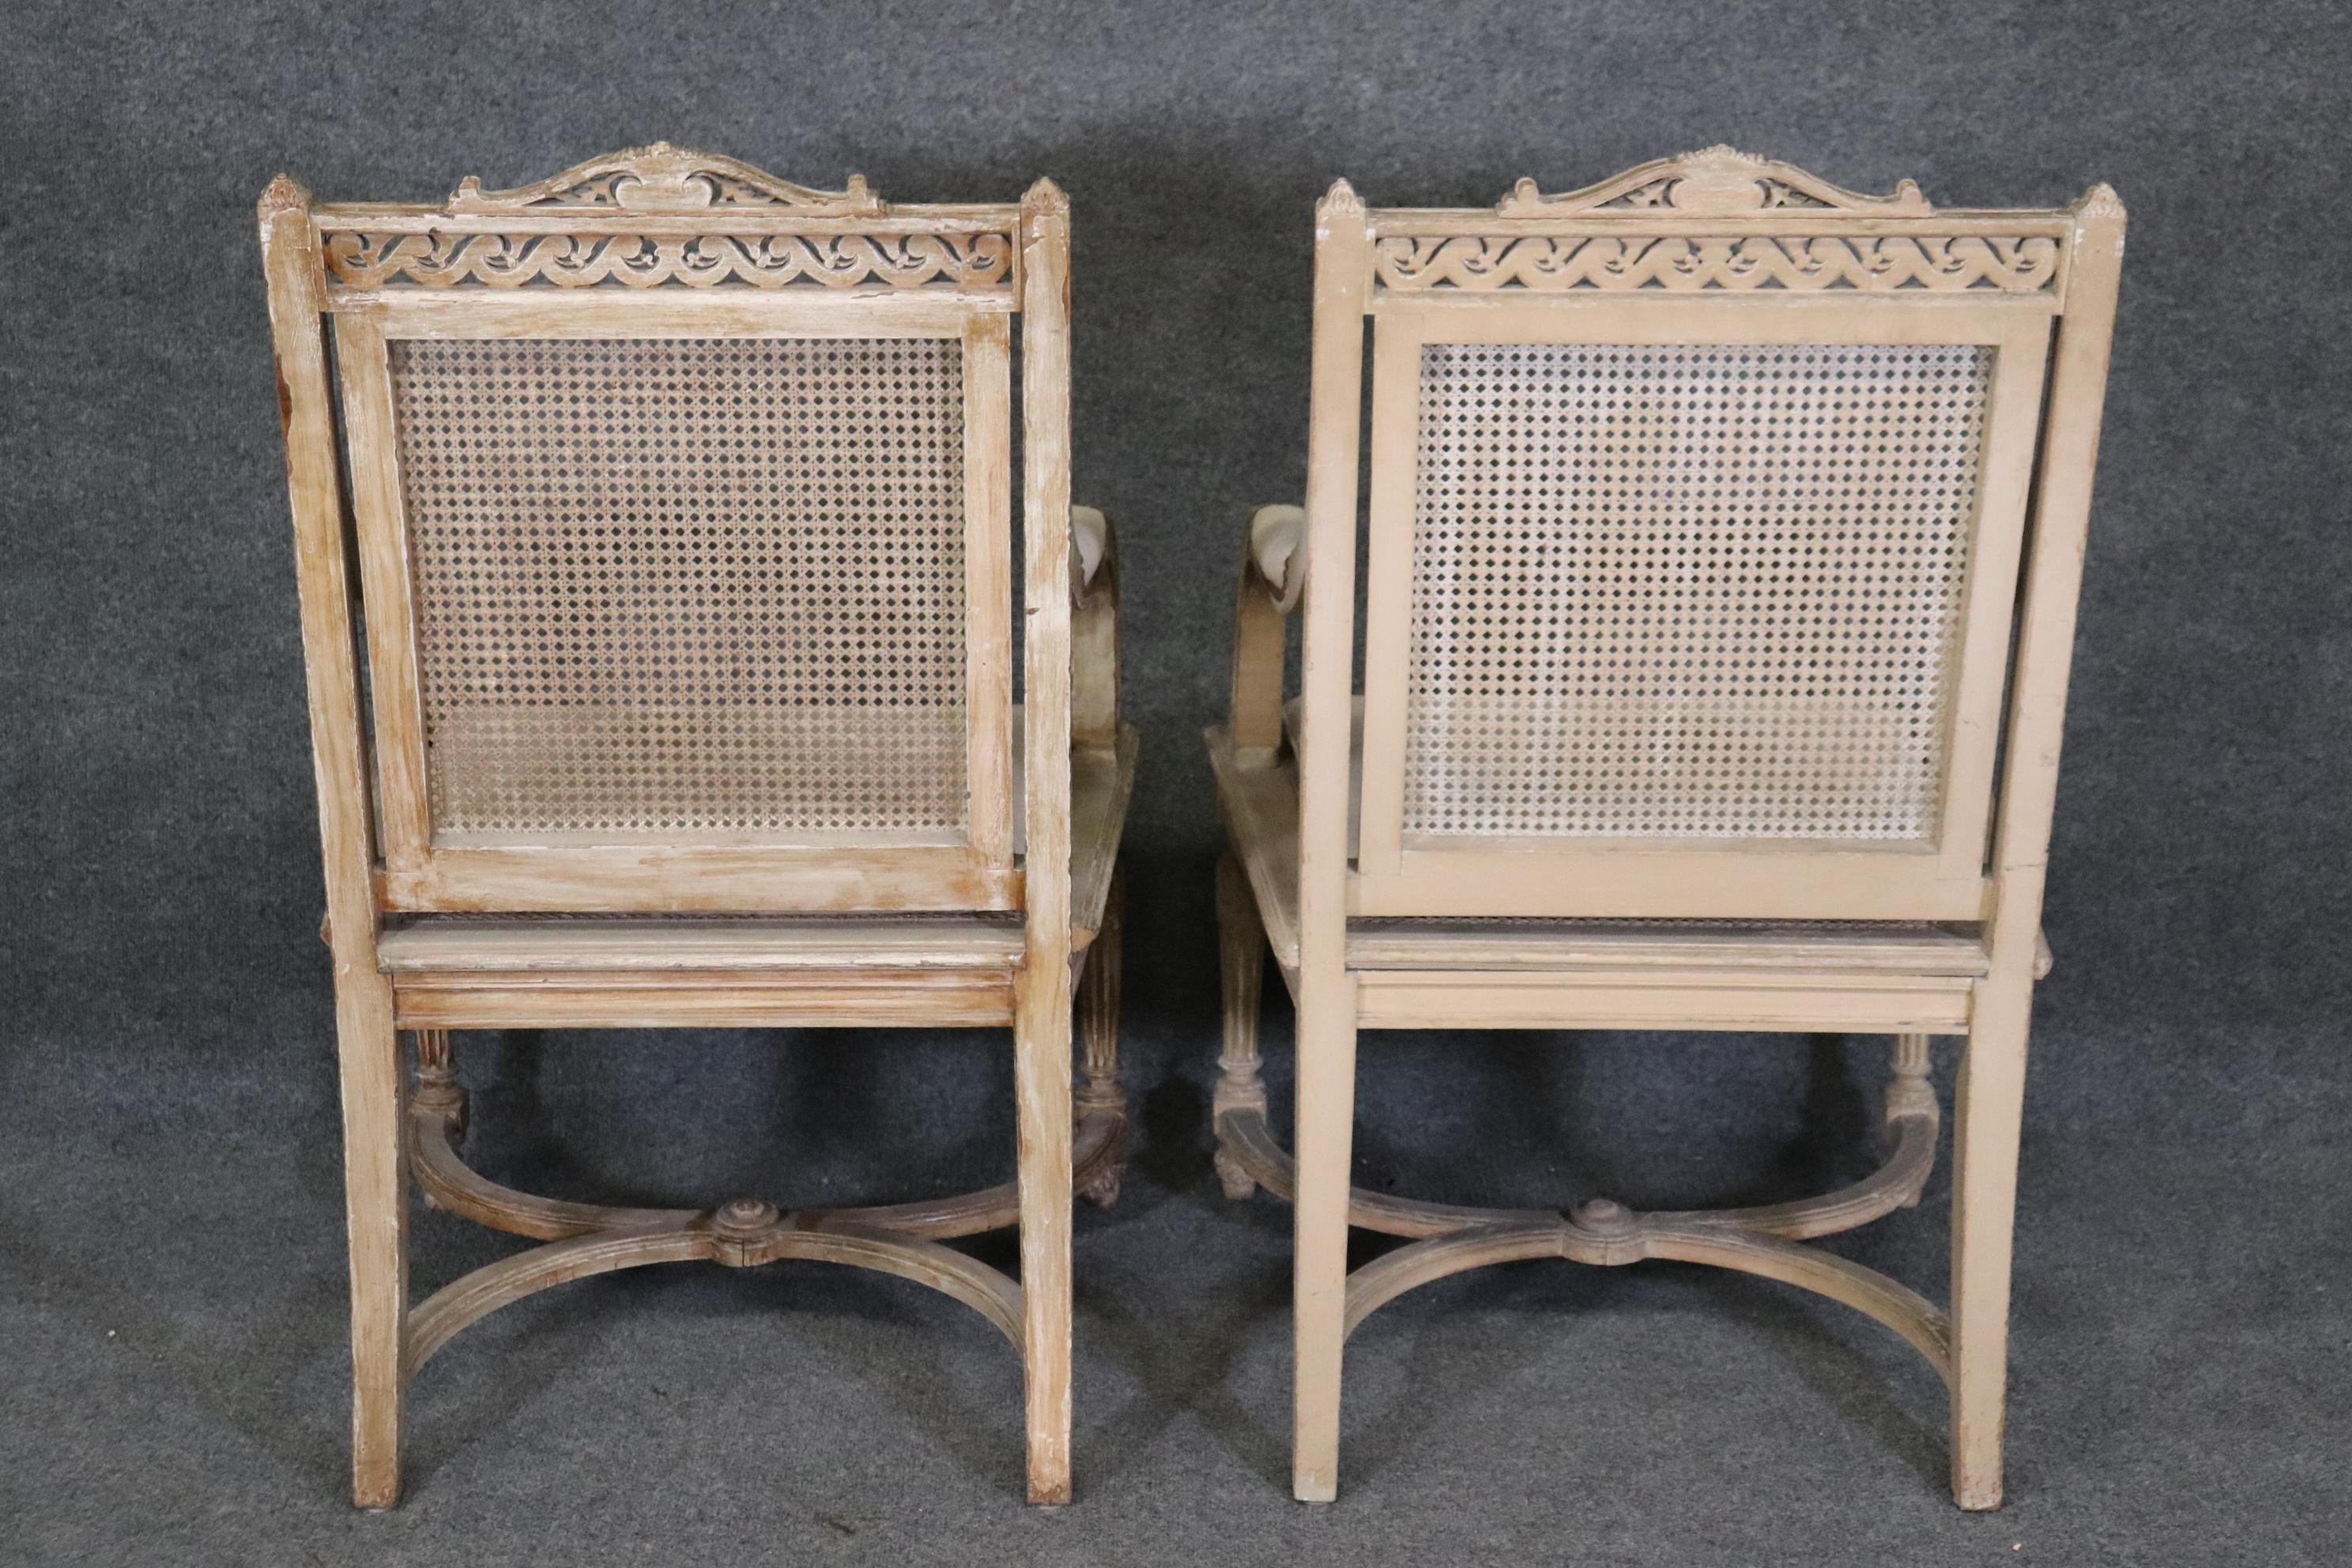   Pair of Cane Back Antique White Paint Decorated Louis XVI Style Armchairs Dini For Sale 2